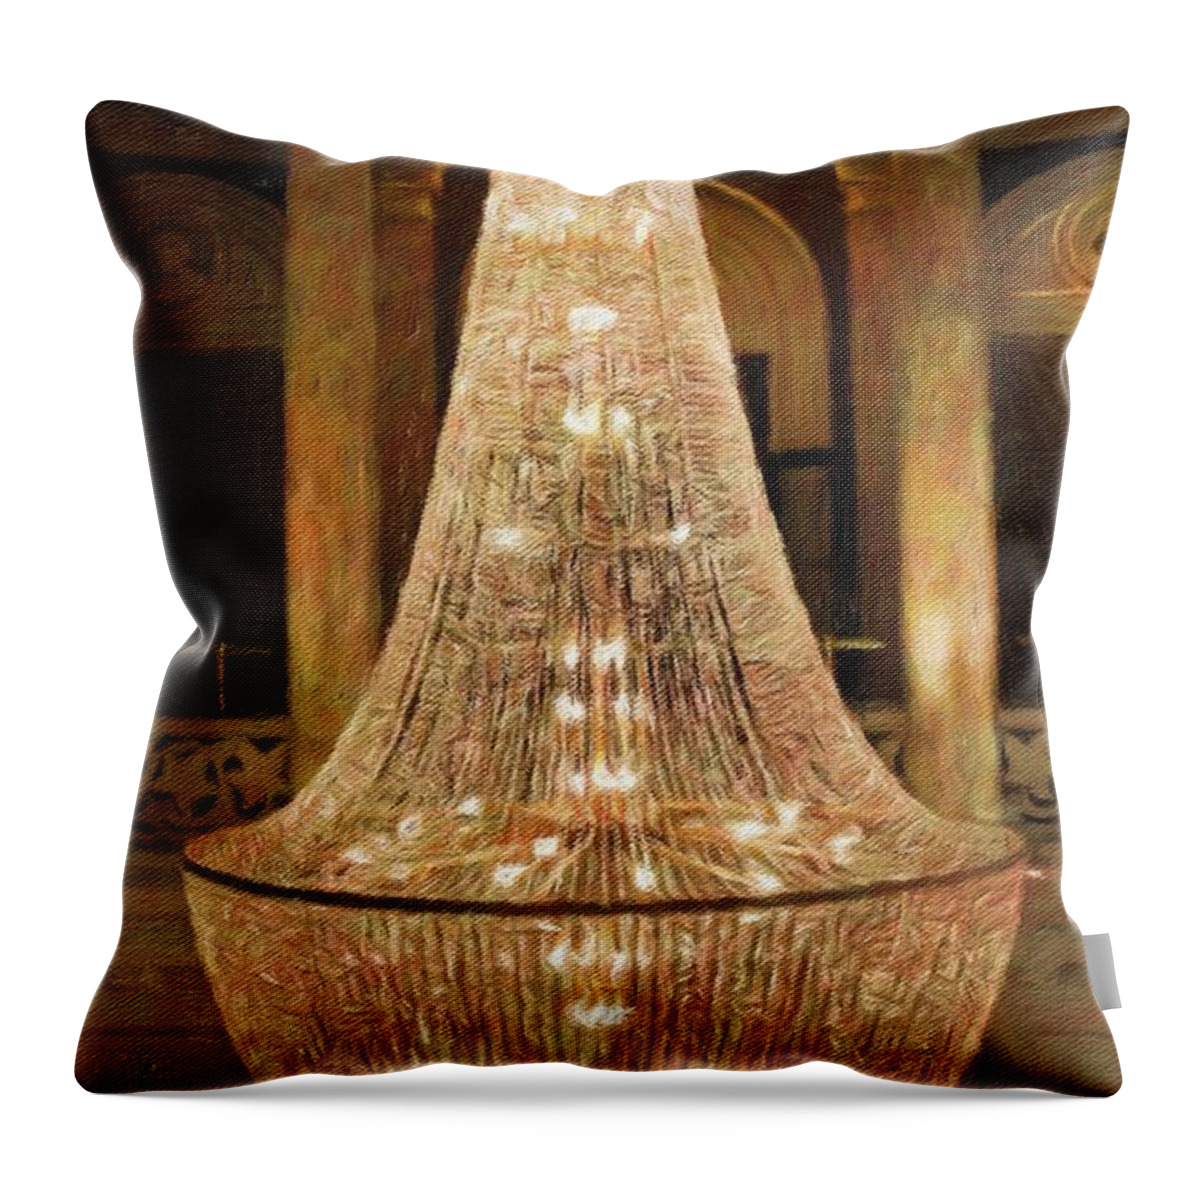 Chandelier The Grosvenor Hotel Buckingham Palace Victoria London Uk England Britain Lobby Throw Pillow featuring the photograph The Chandelier Too by Diane Lindon Coy